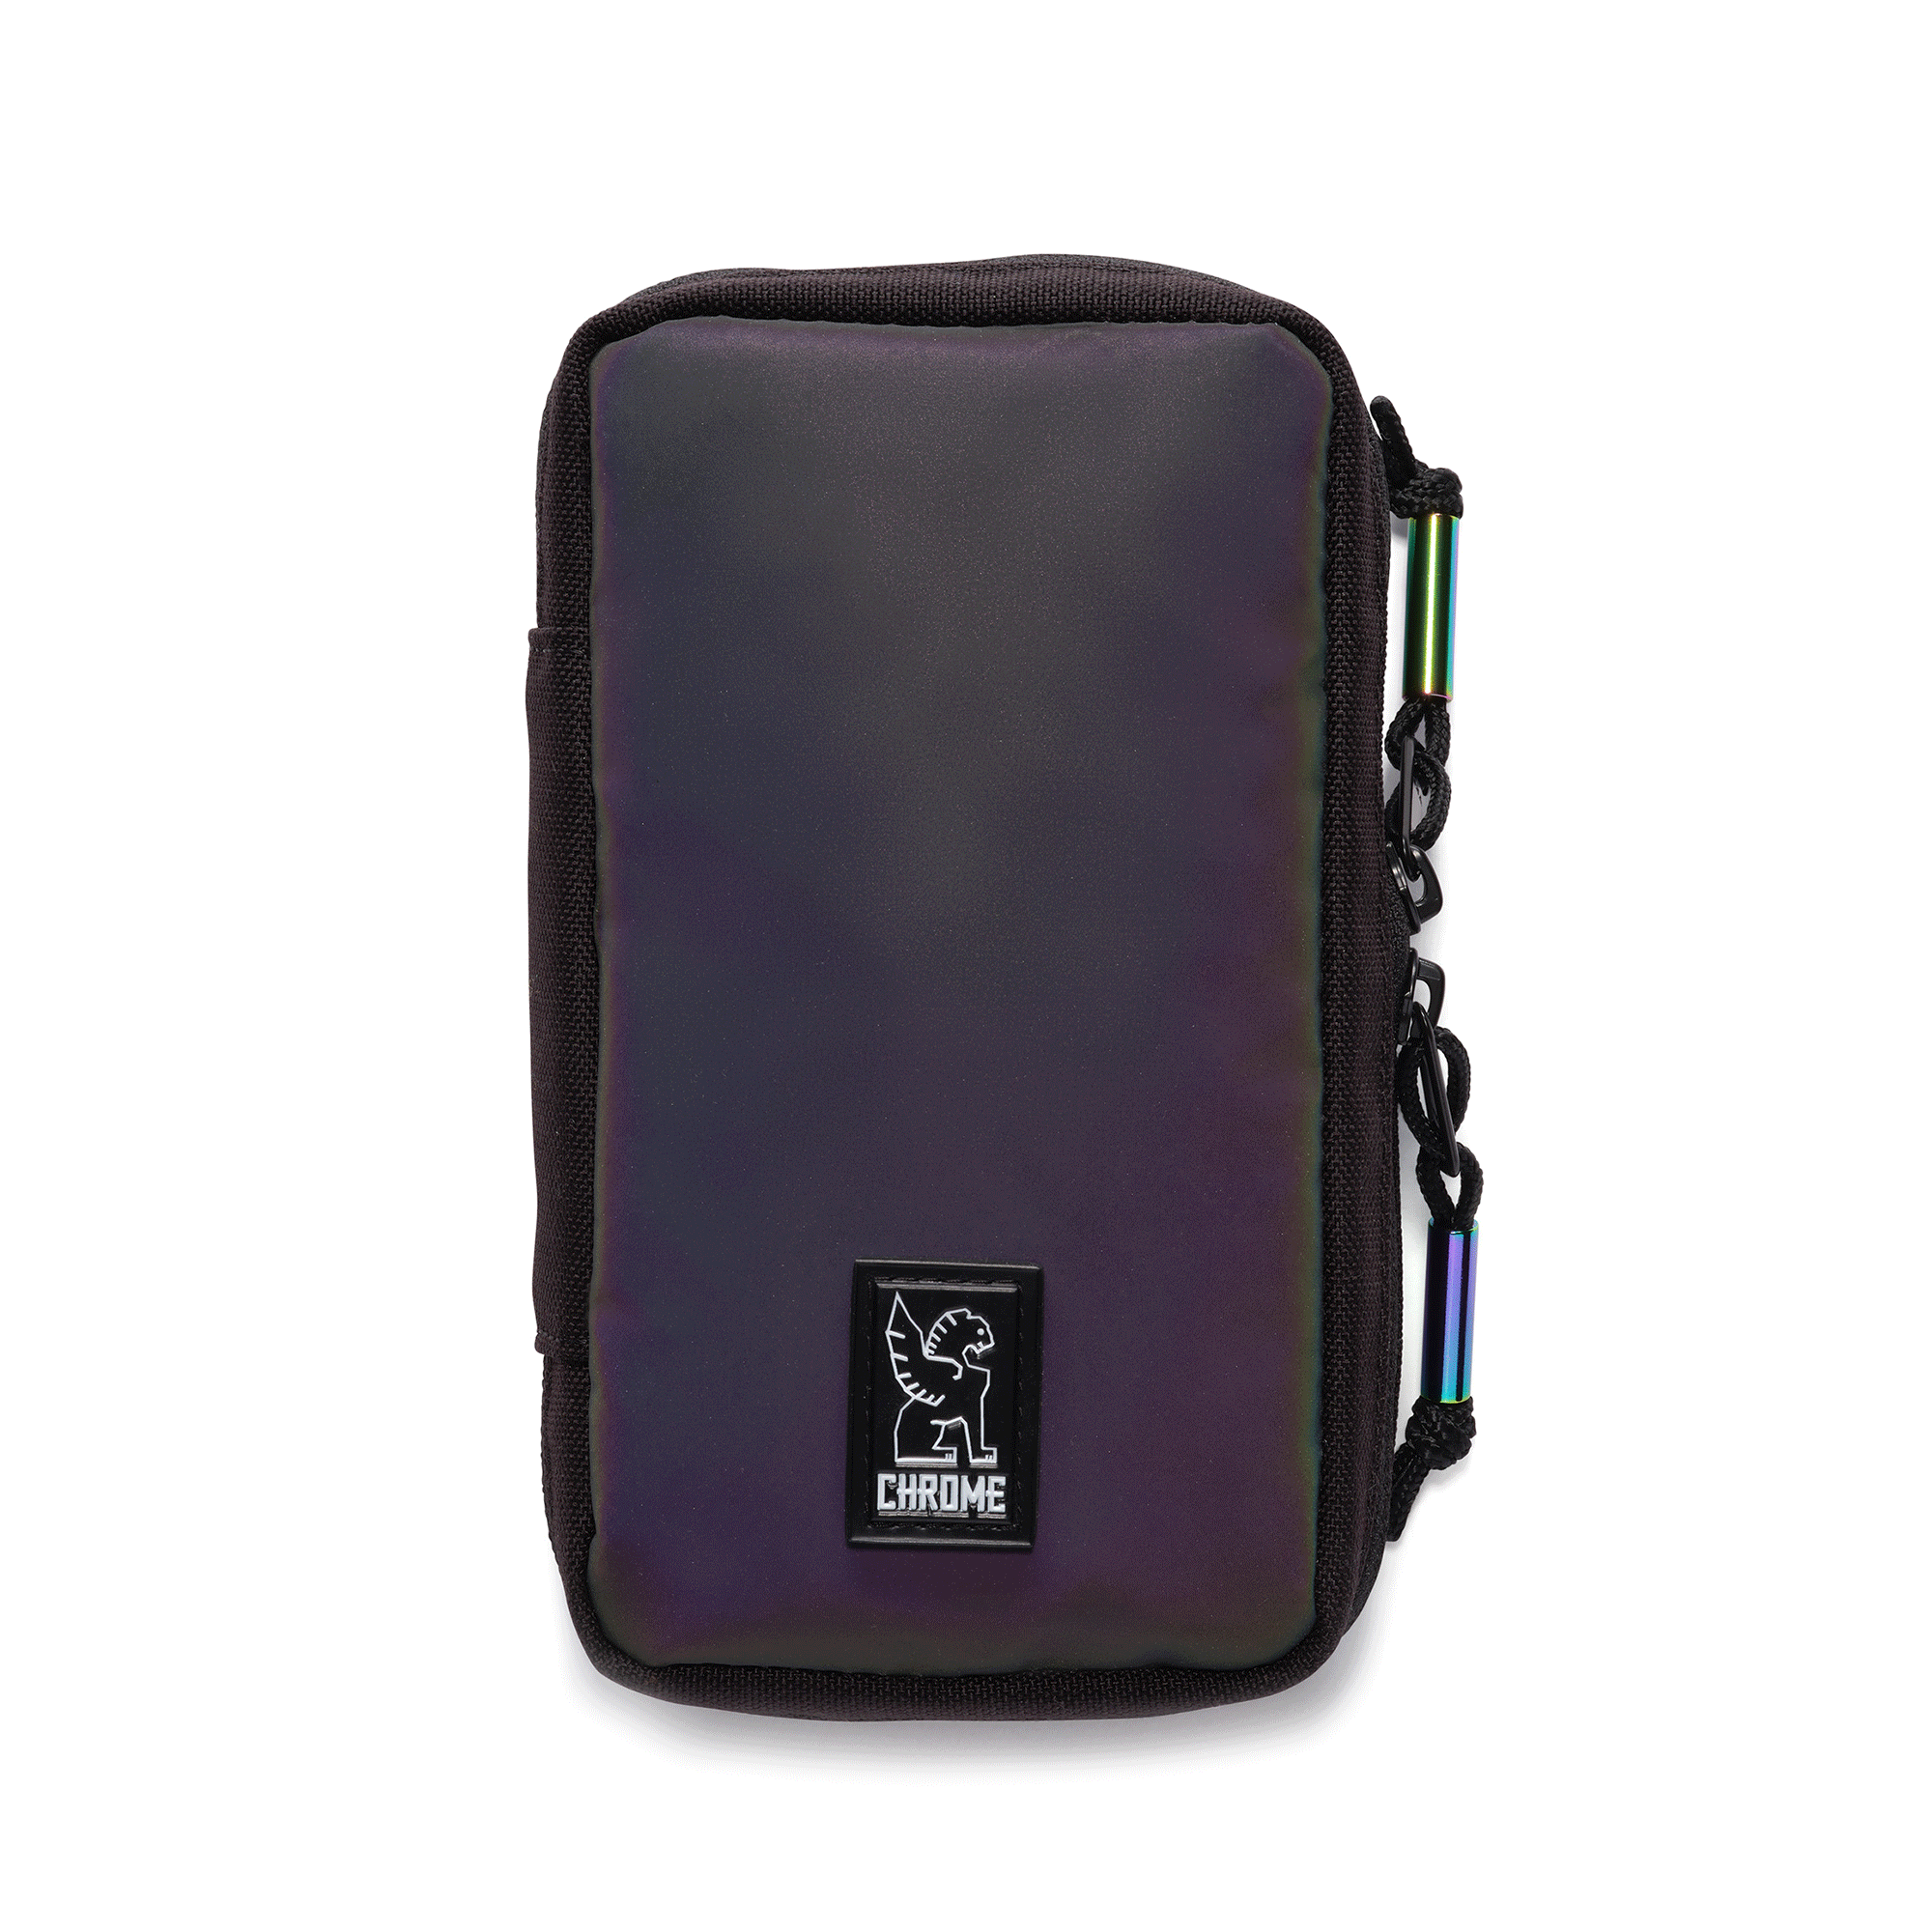 Tech Accessory Pouch in Rainbow Reflective showing the reflectivity #color_rainbow reflective